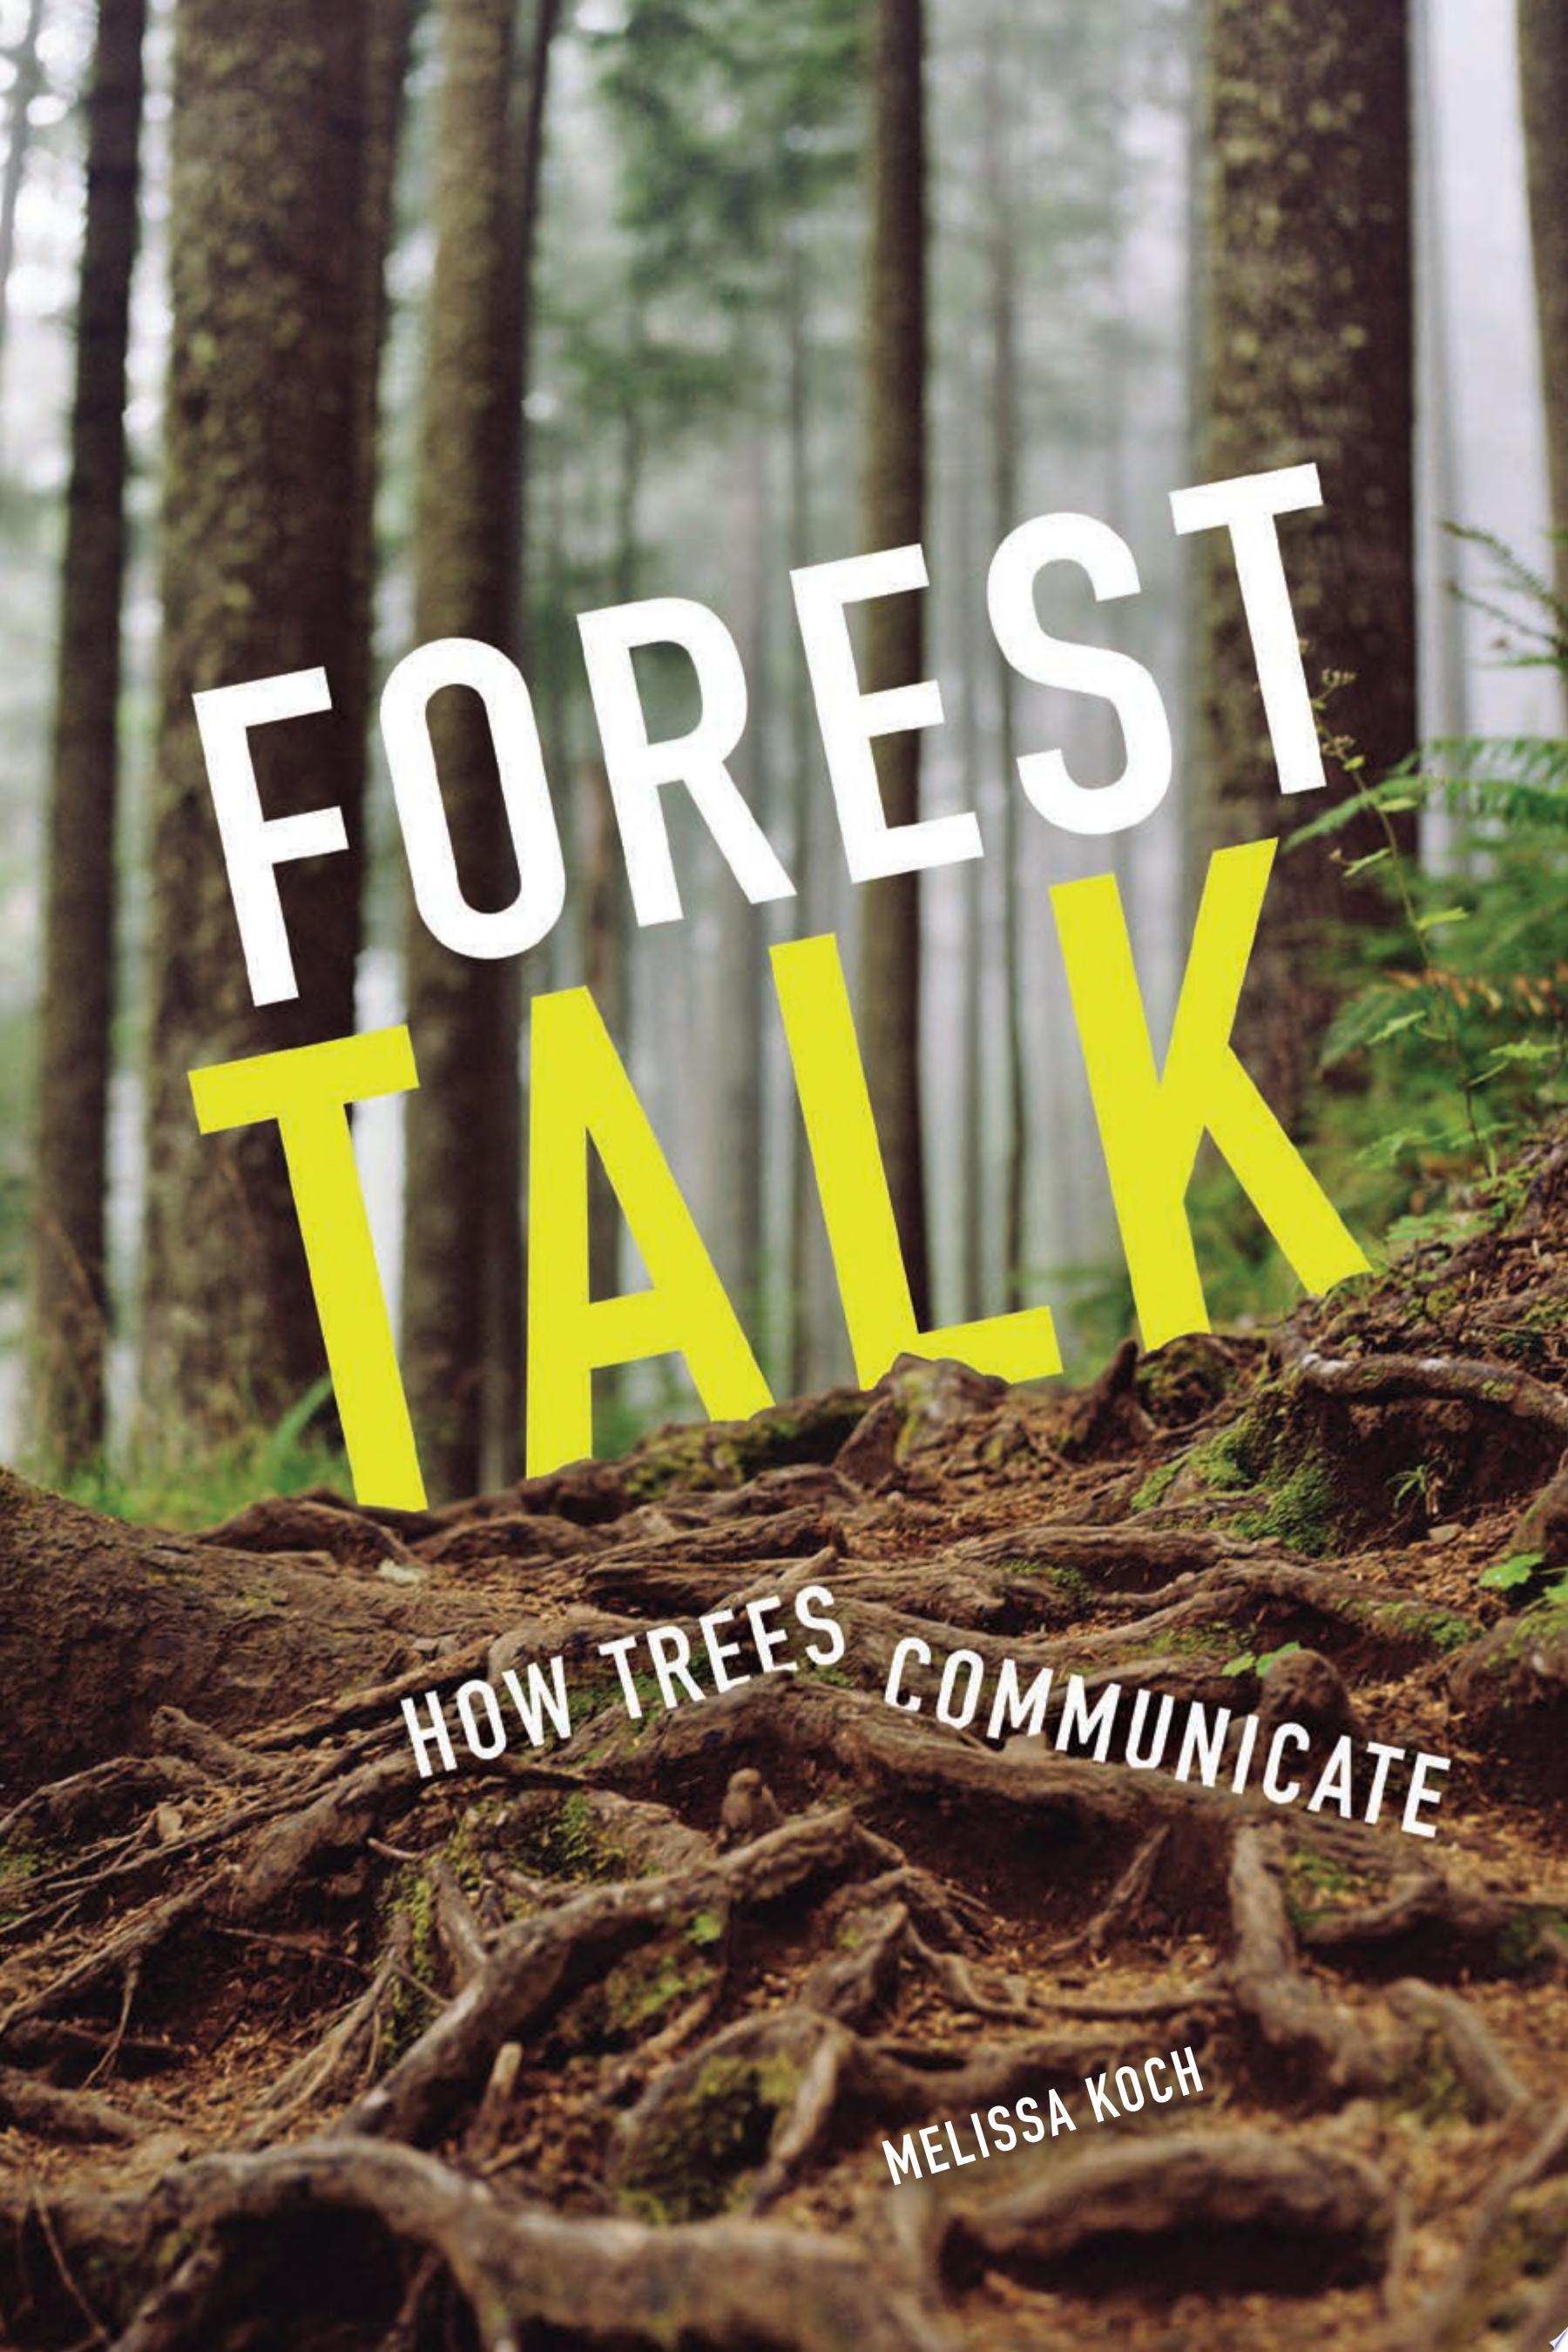 Image for "Forest Talk"